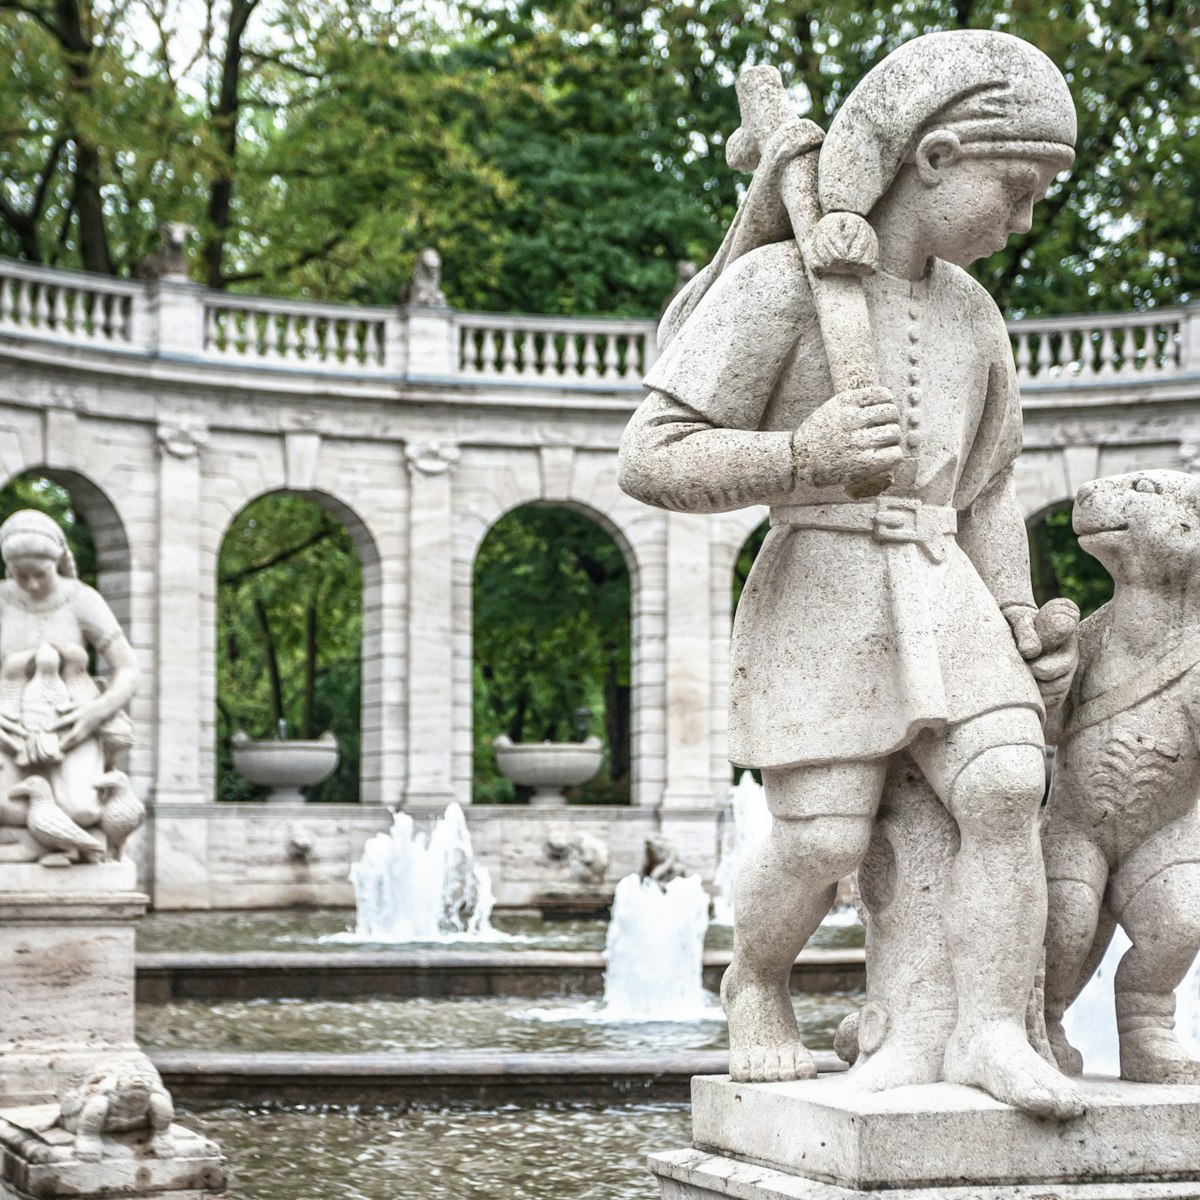 Marchenbrunnen Fairy Tale Fountain (1913) in the Volkspark Friedrichshain Park, Berlin, Germany; Shutterstock ID 220555540; Your name (First / Last): Josh Vogel; Project no. or GL code: 56530; Network activity no. or Cost Centre: Online-Design; Product or Project: 65050/7529/Josh Vogel/LP.com Destination Galleries